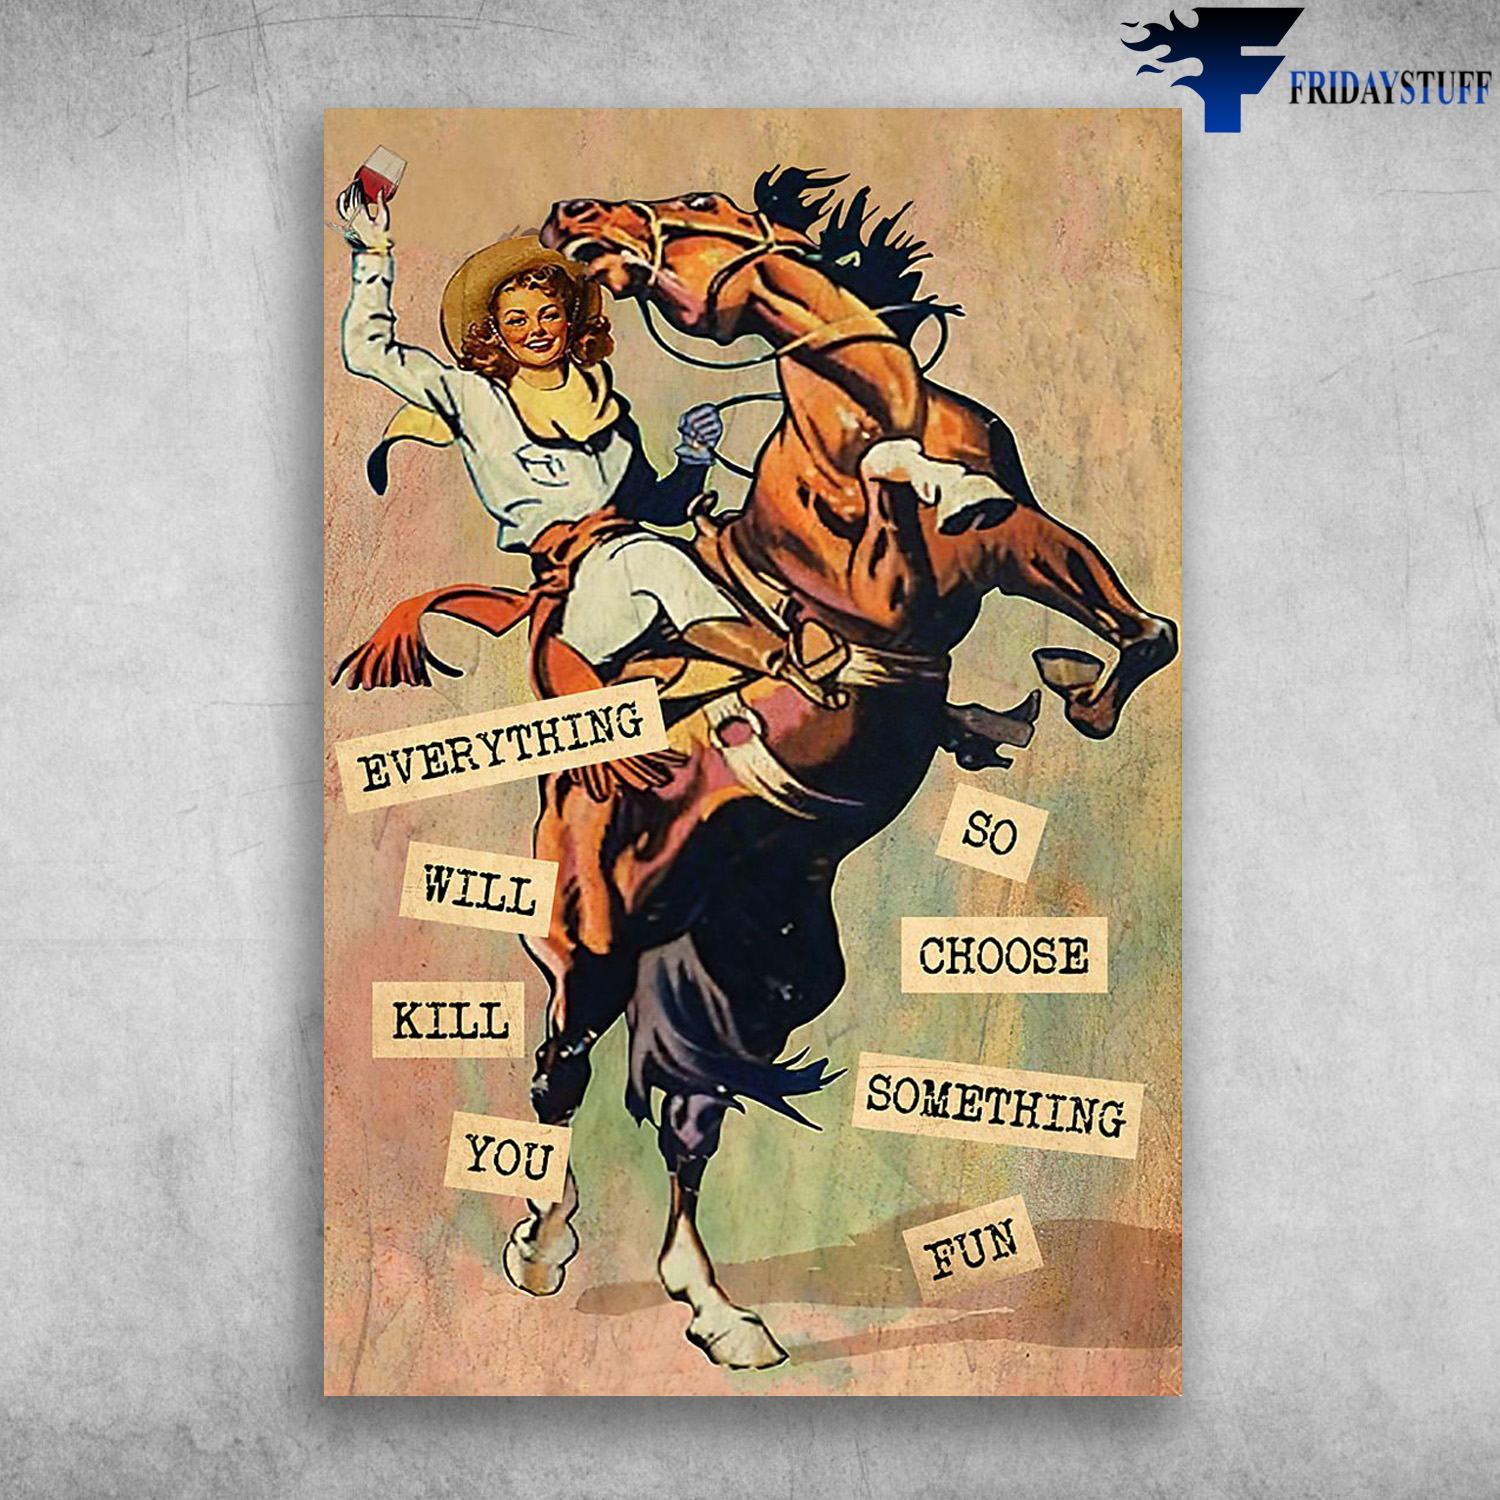 Cowgirl Riding Horse And Drinking Wine - Everything Will Kill You, So Choose Something Fun